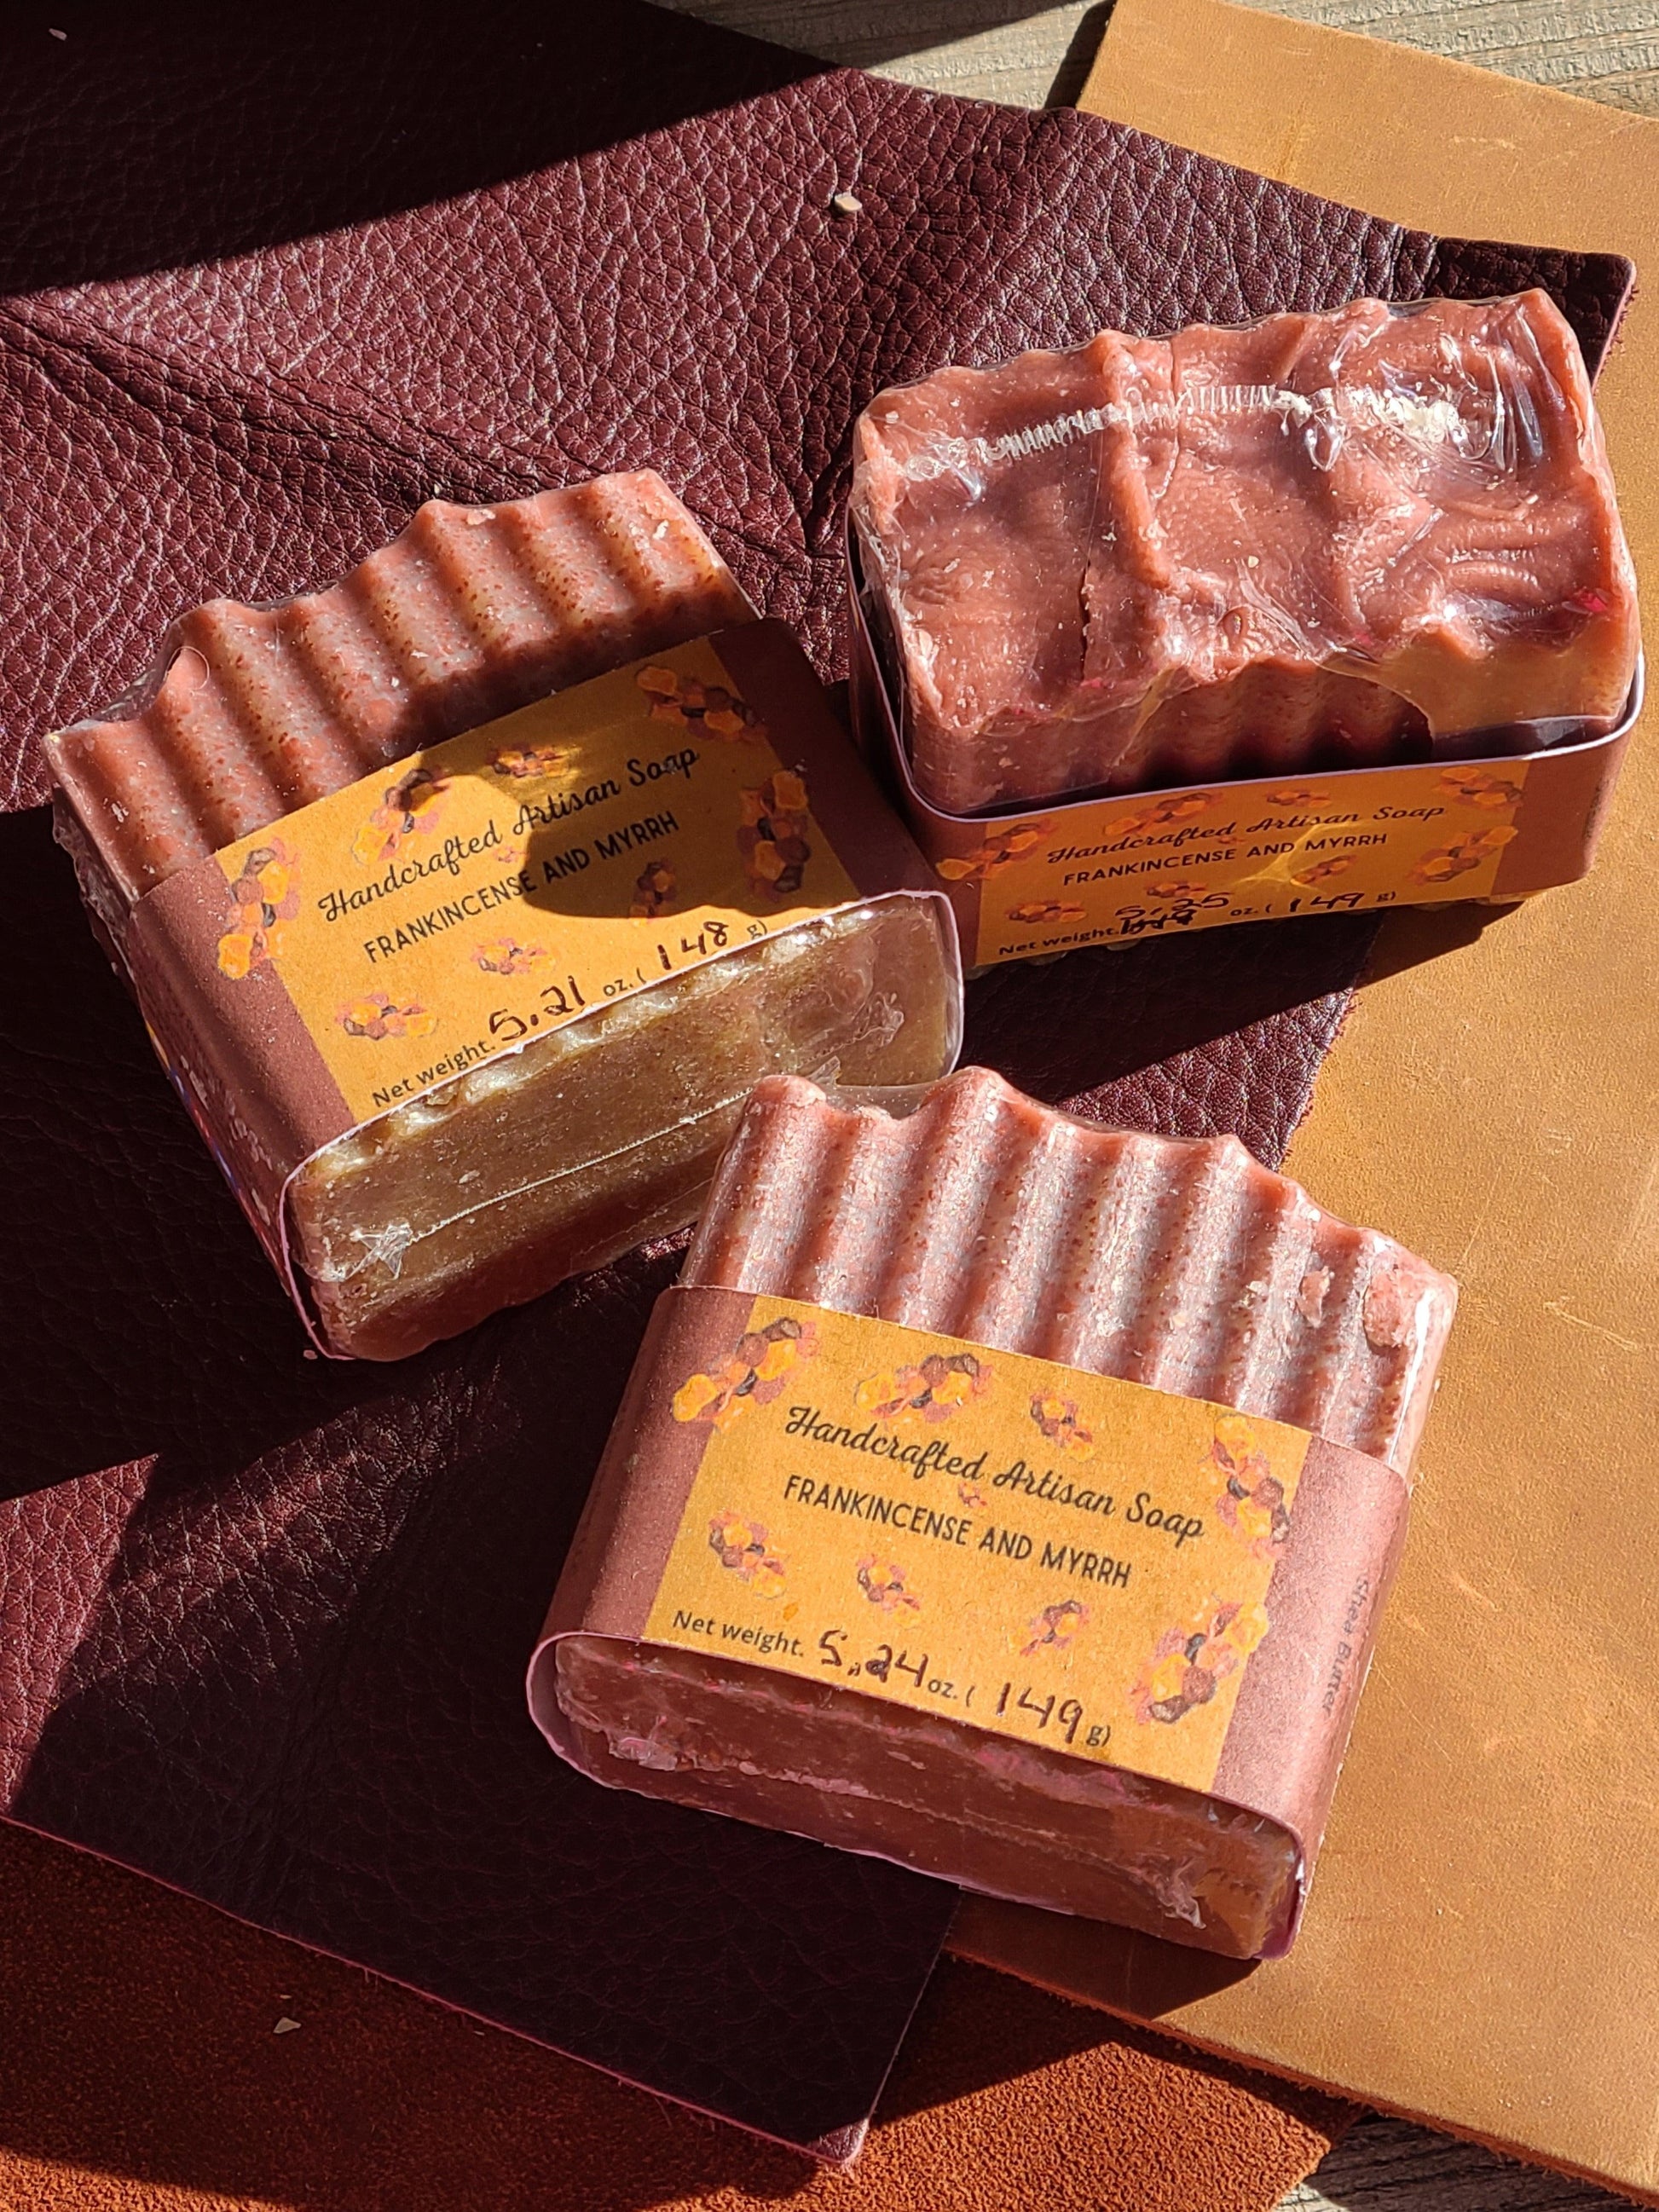 Frankincense and Myrrh Handcrafted Soap